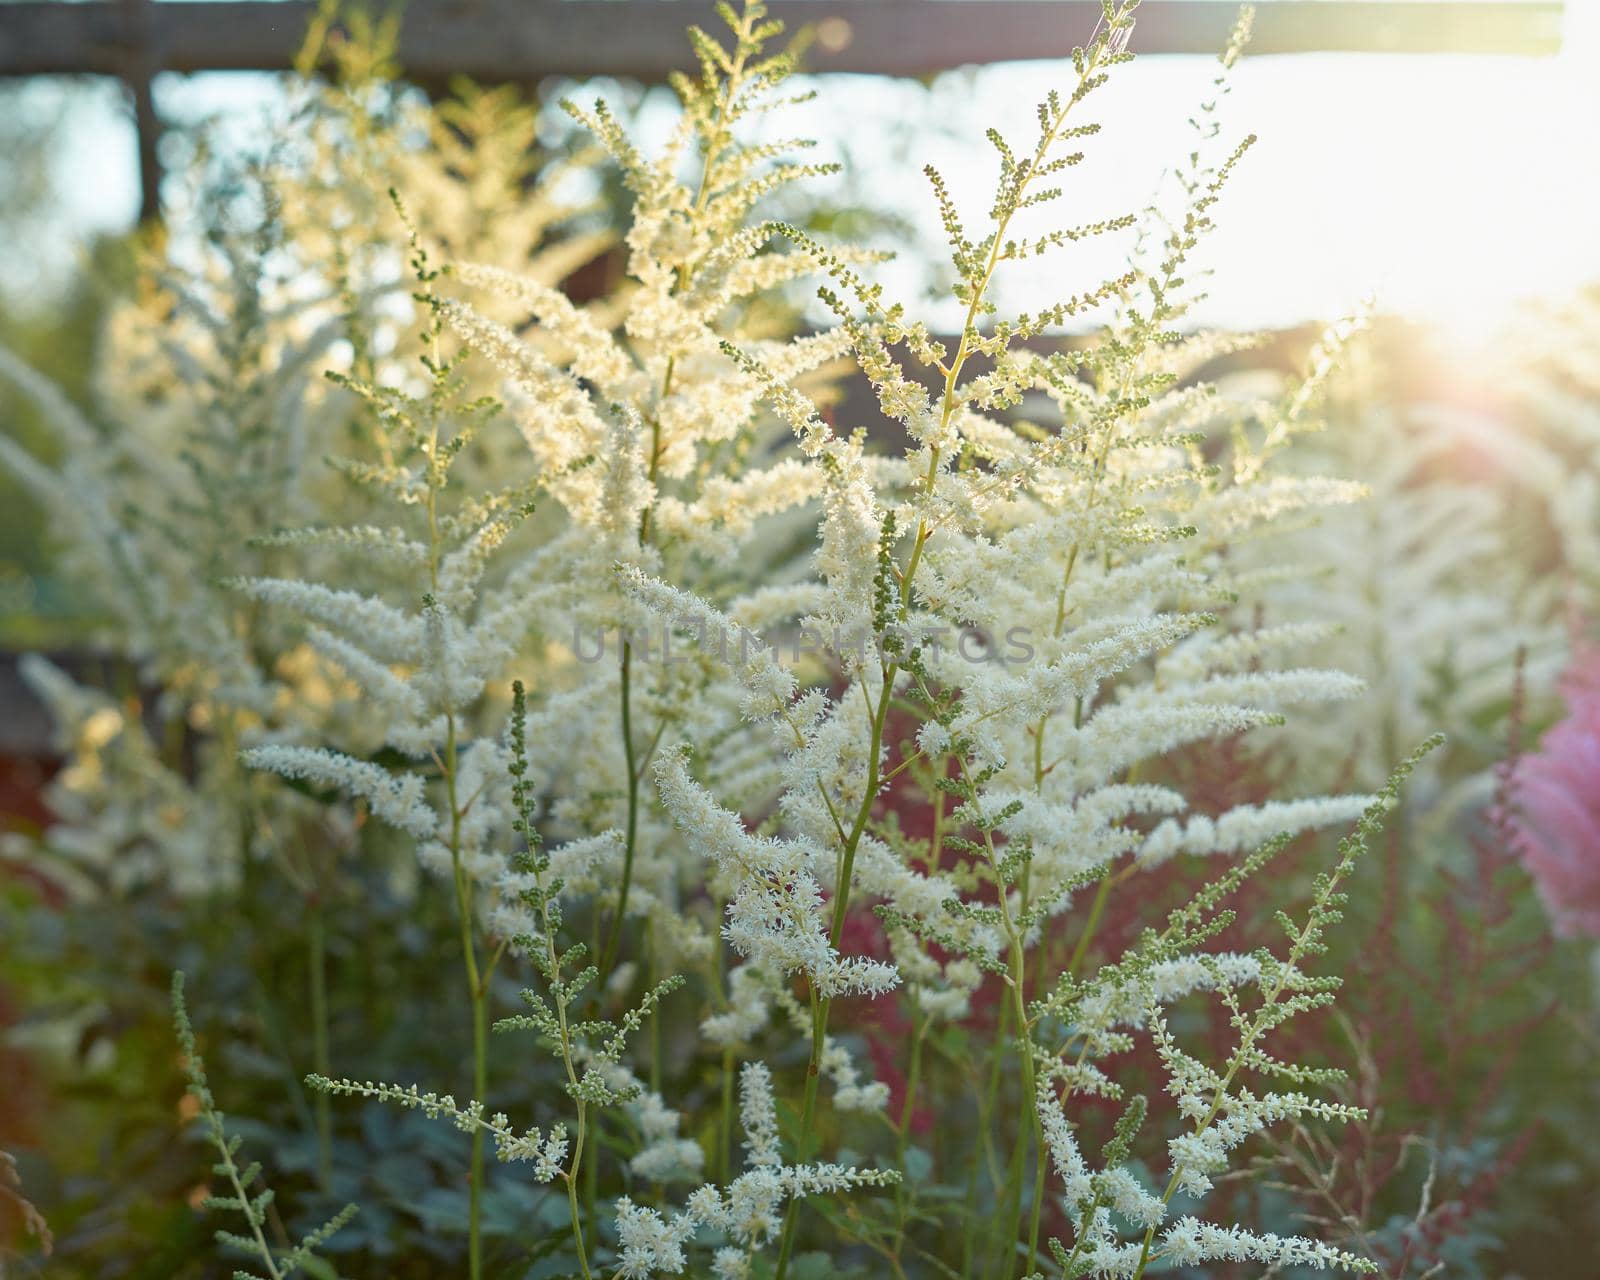 Beautiful Bush of flowers Astilbe with a fluffy white panicles, close up